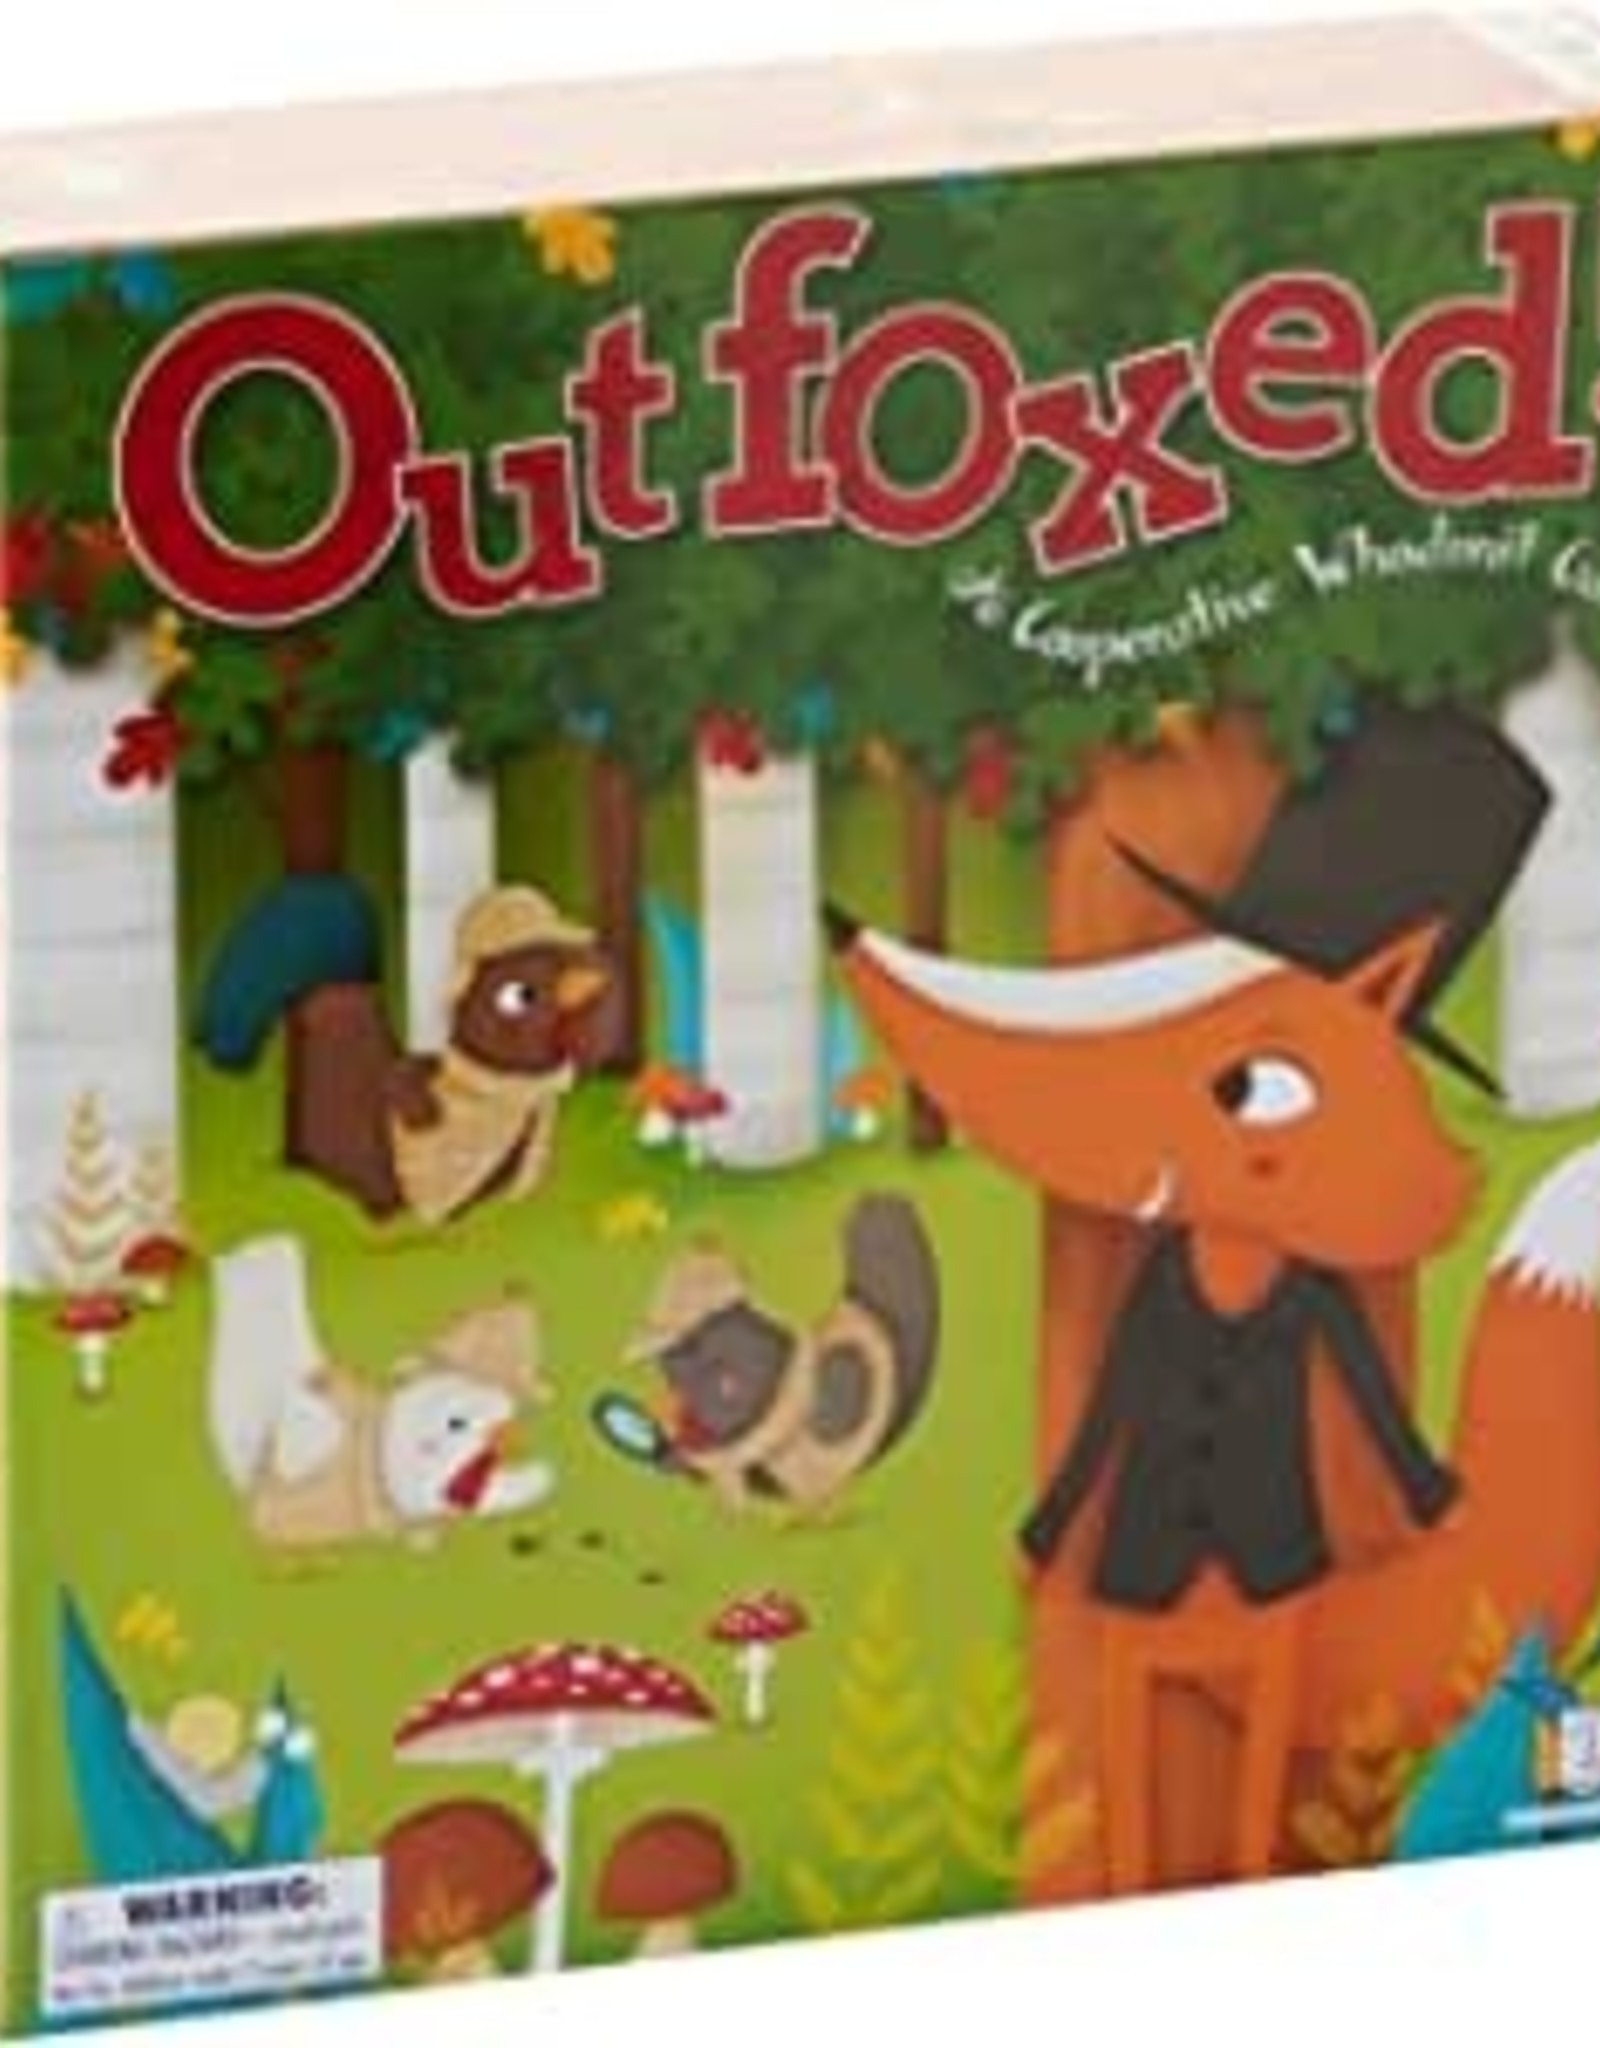 Gamewright Outfoxed!